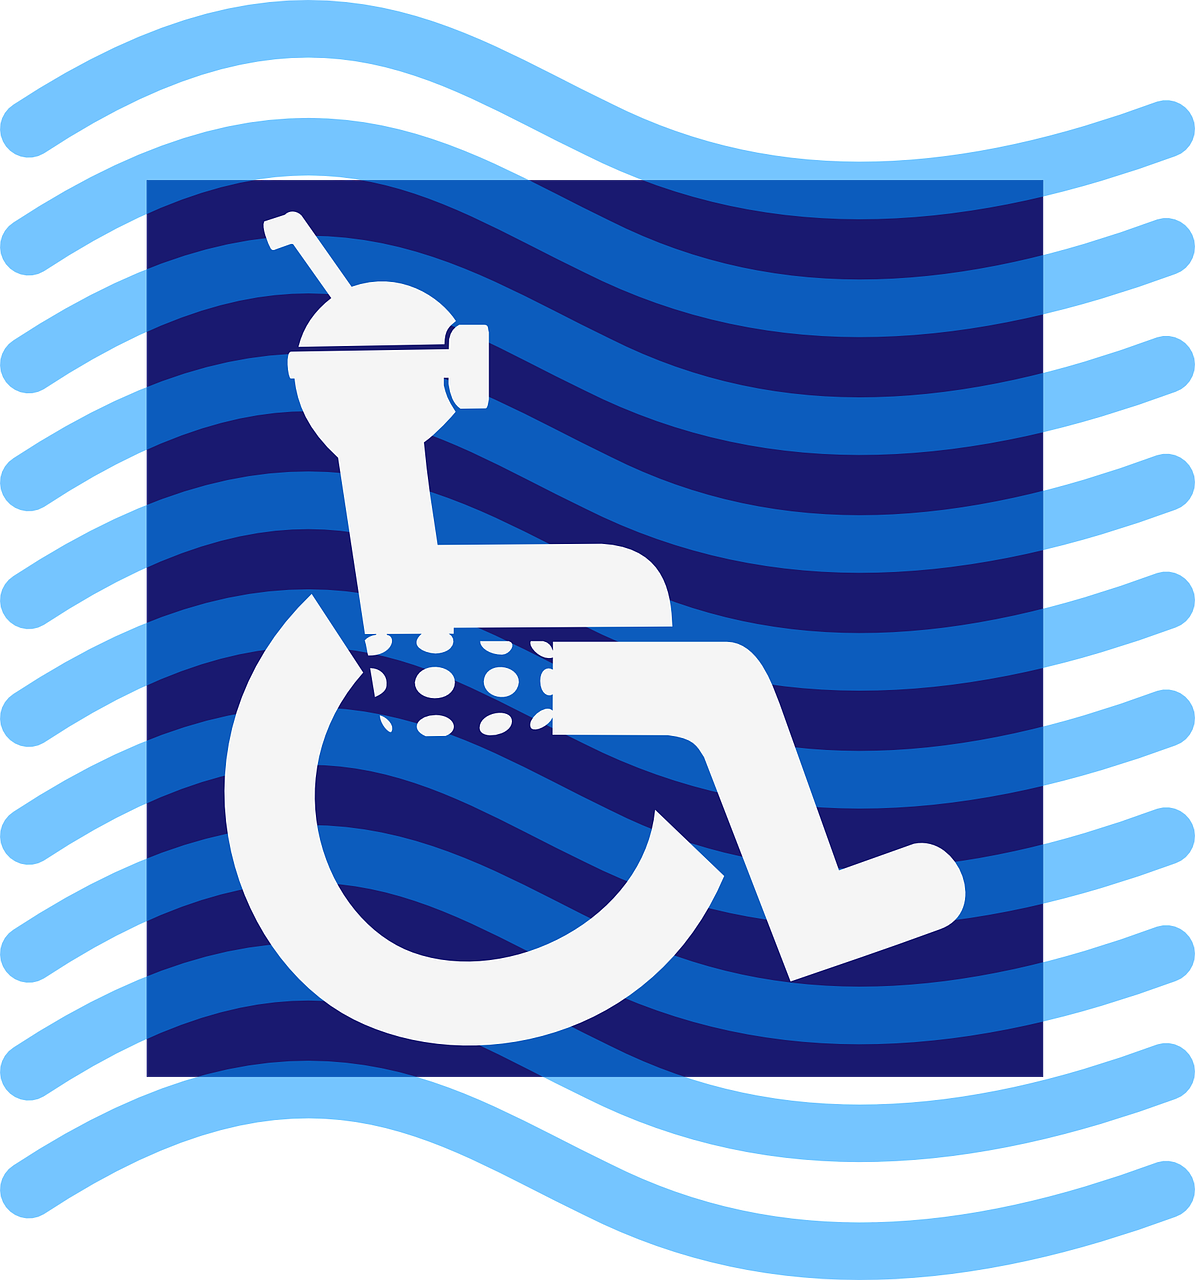 disabled diver wheel chair free photo